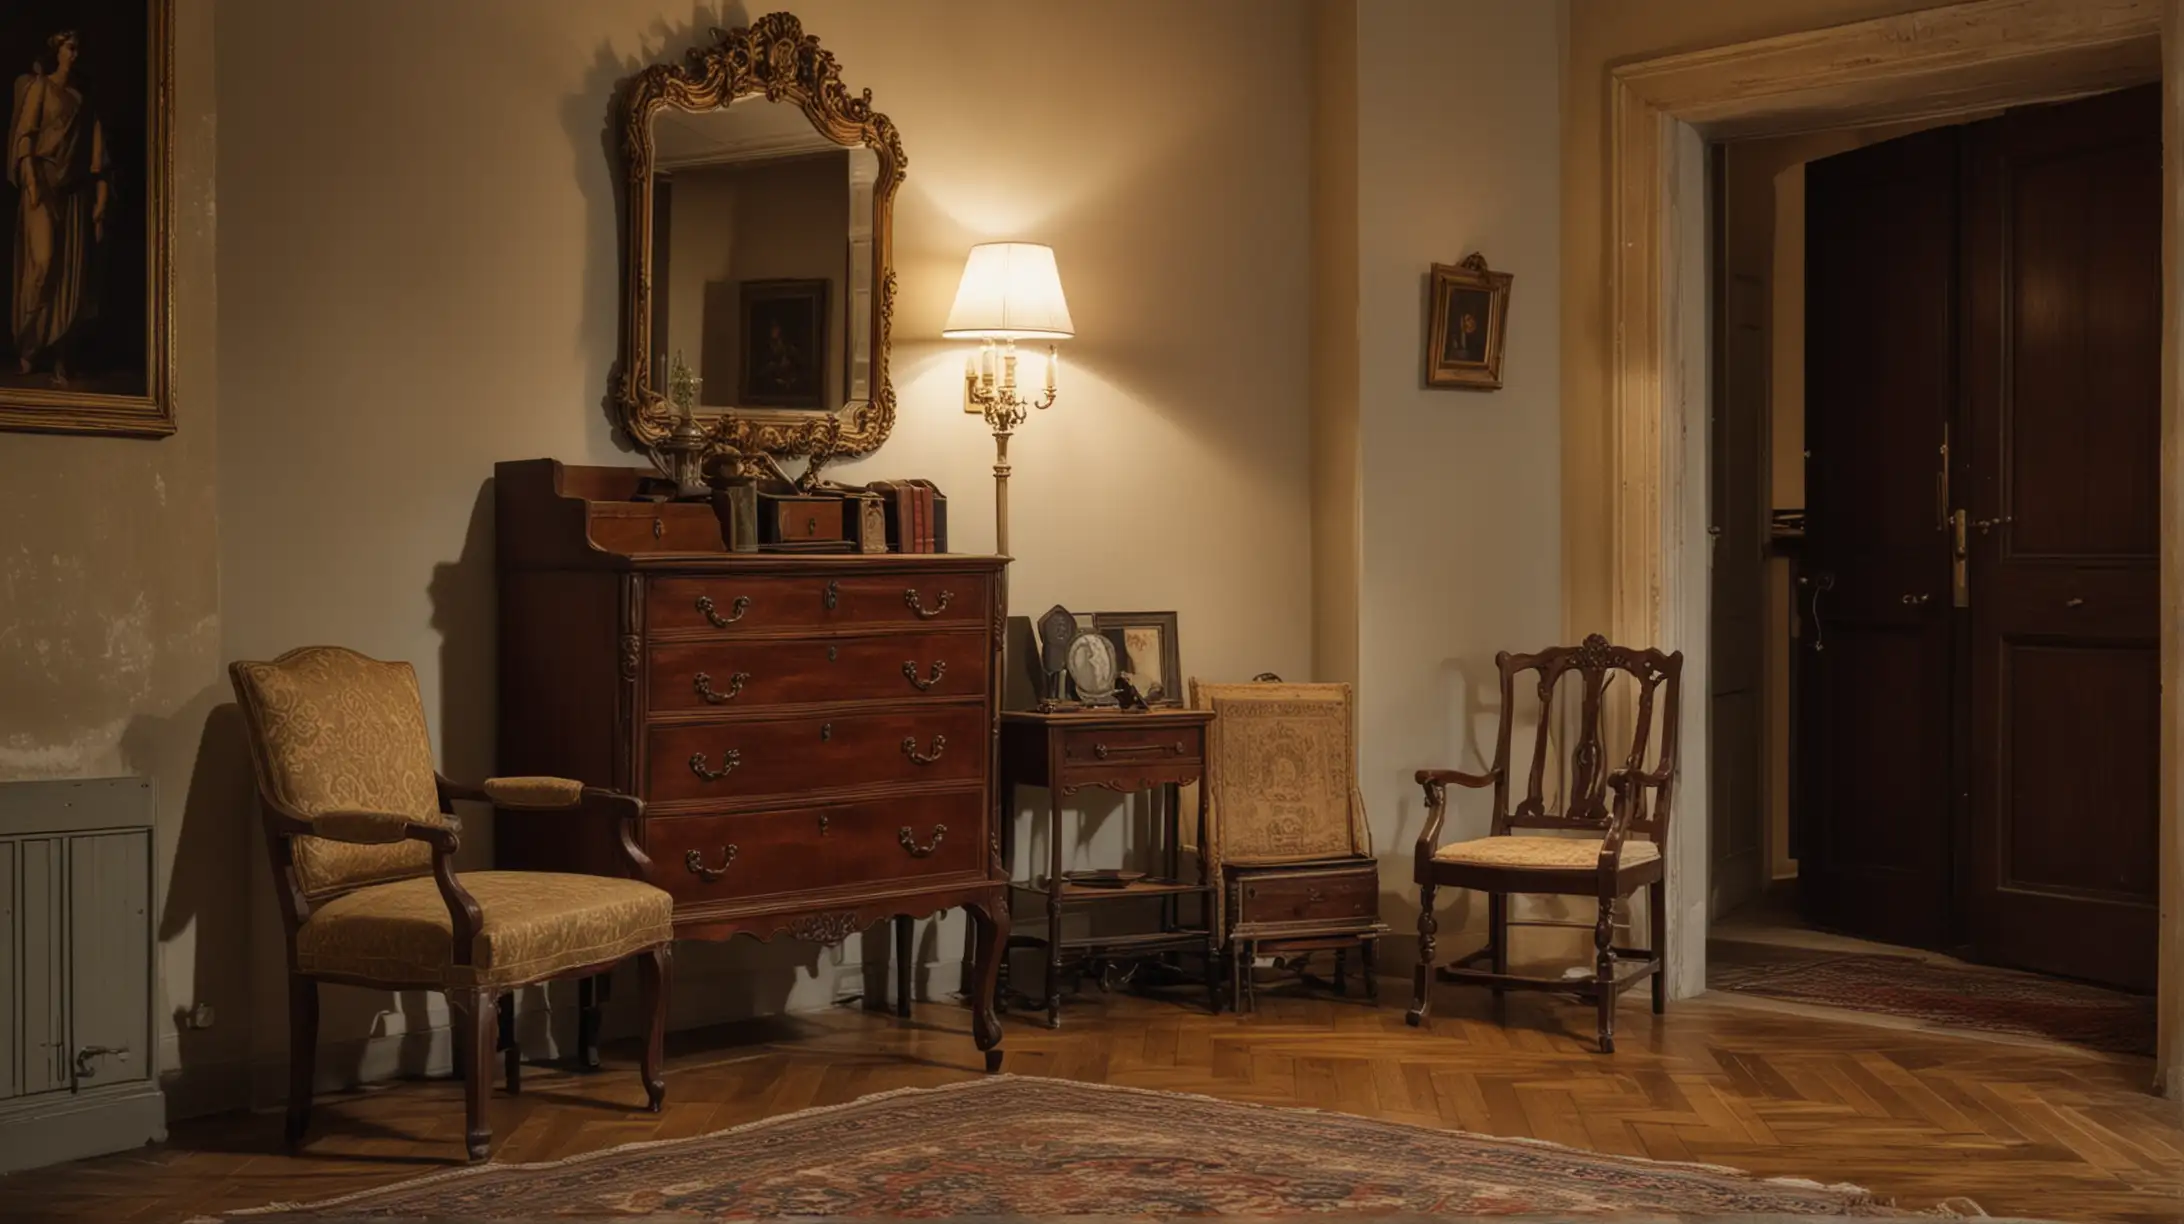 Nighttime Scene Vintage Interior of Prague House with Armchair and Chest of Drawers